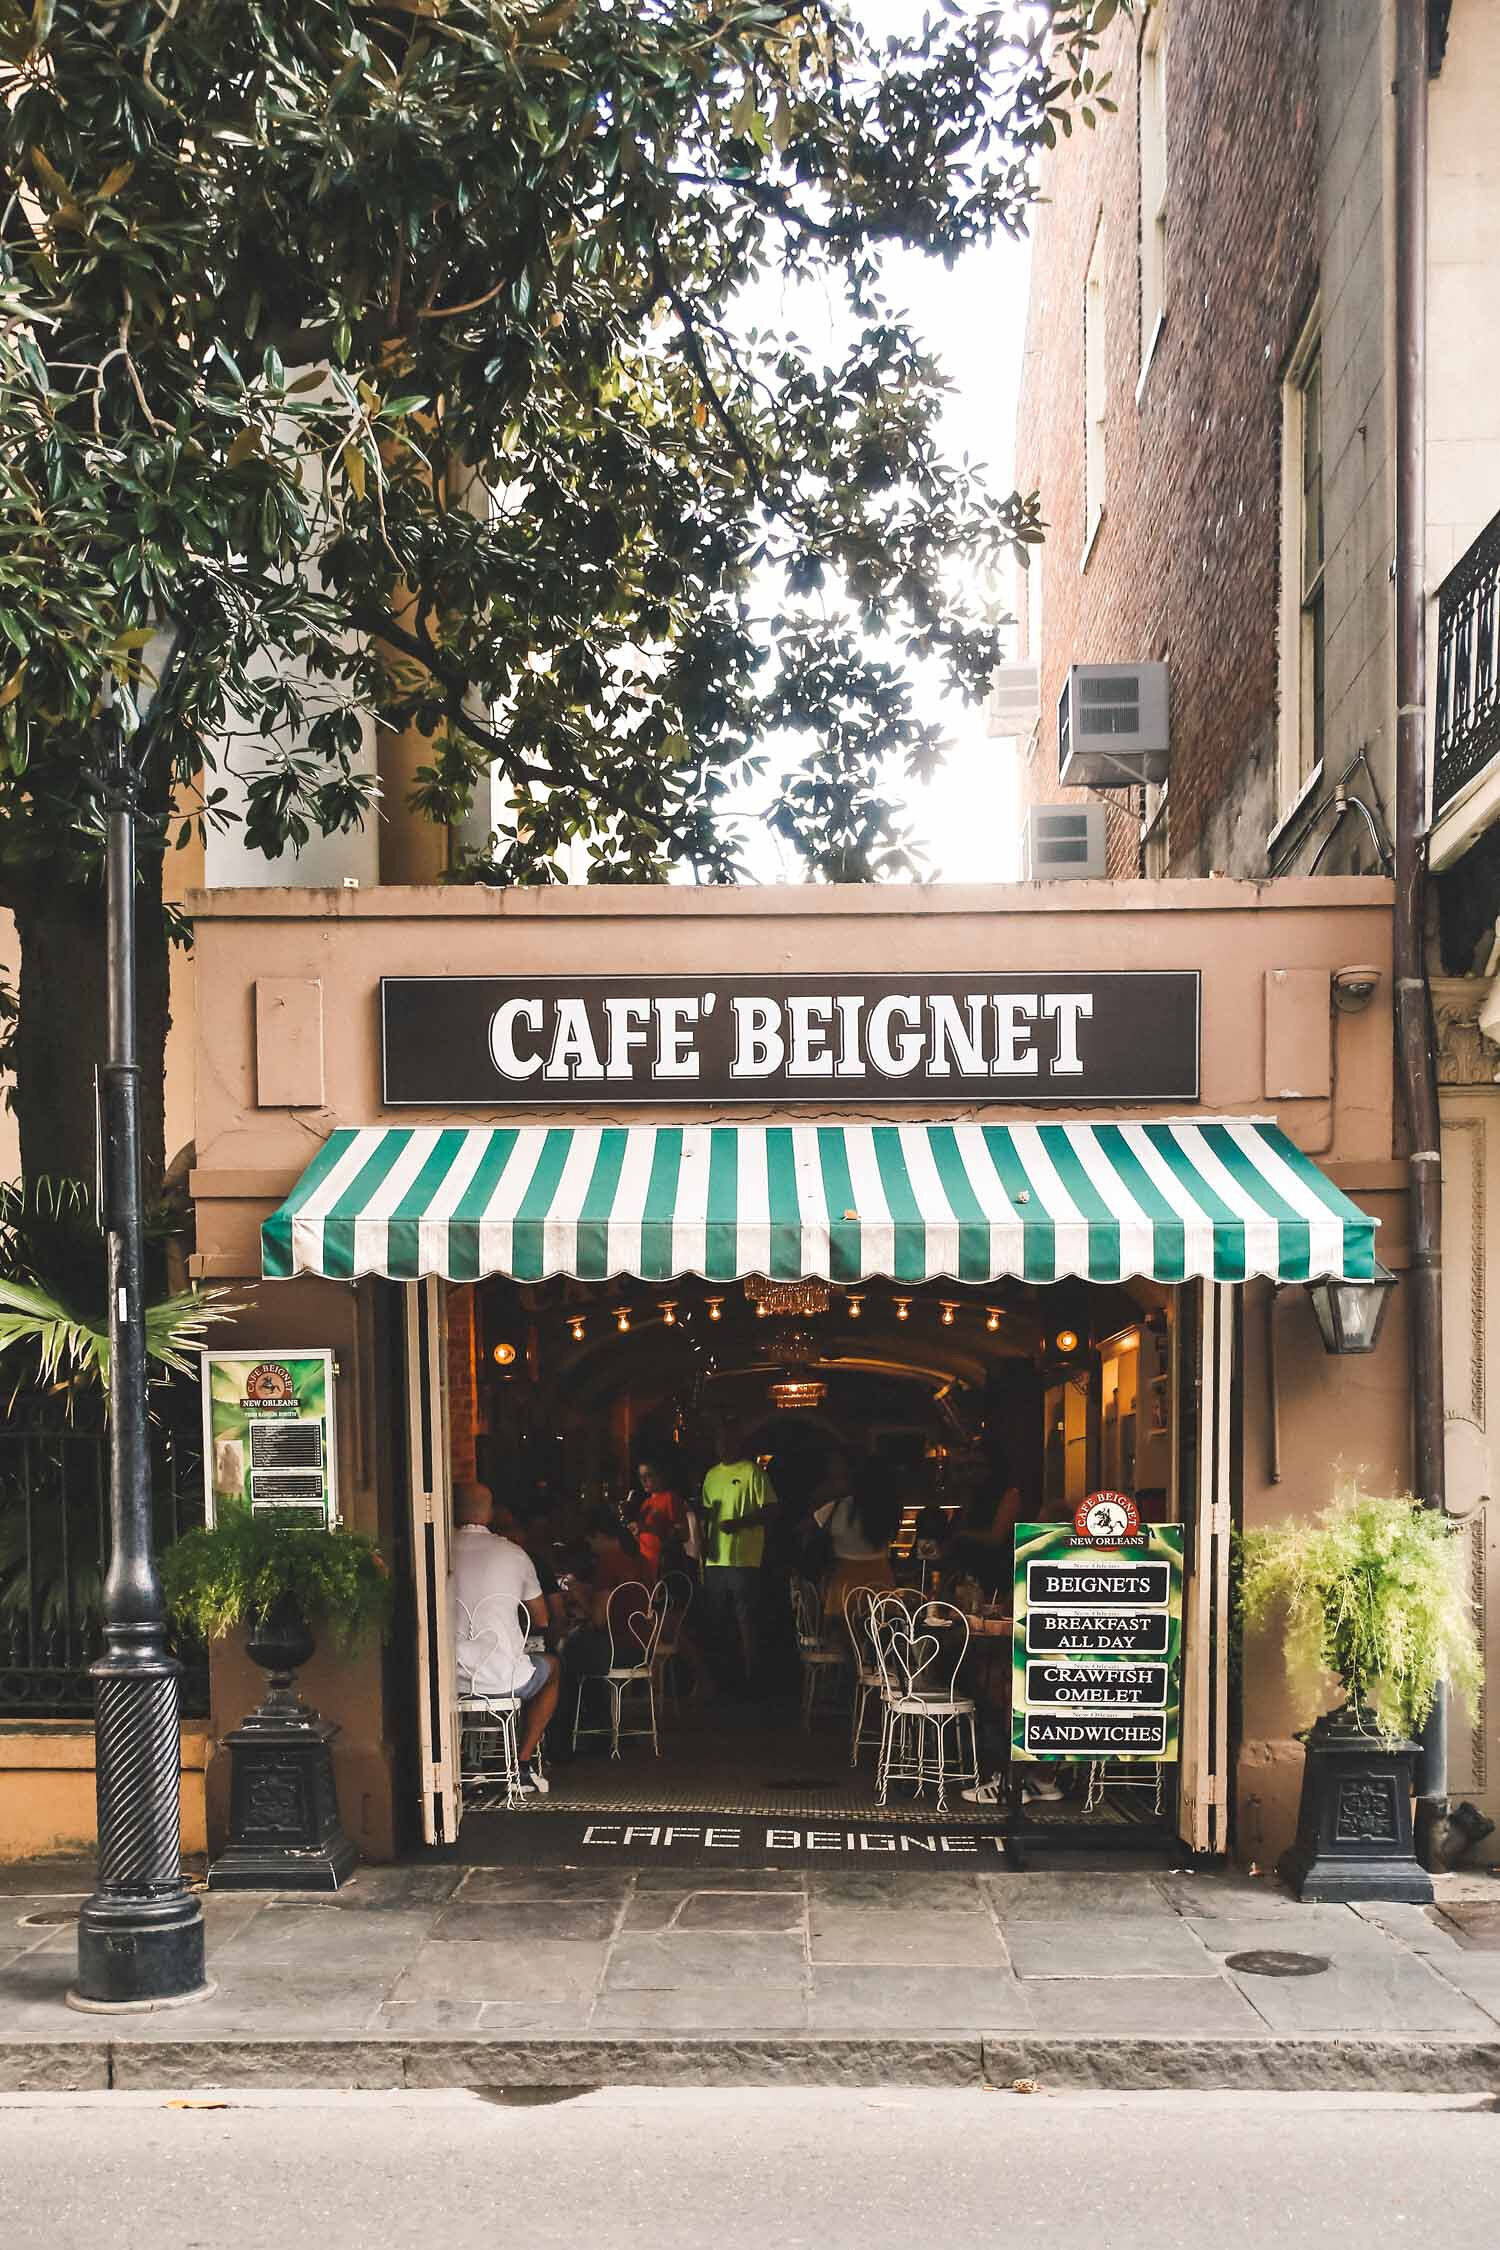 Chelsea Loren Tourism Branding Photographer in New Orleans at Cafe Beignet Cute striped cafe in French Quarter